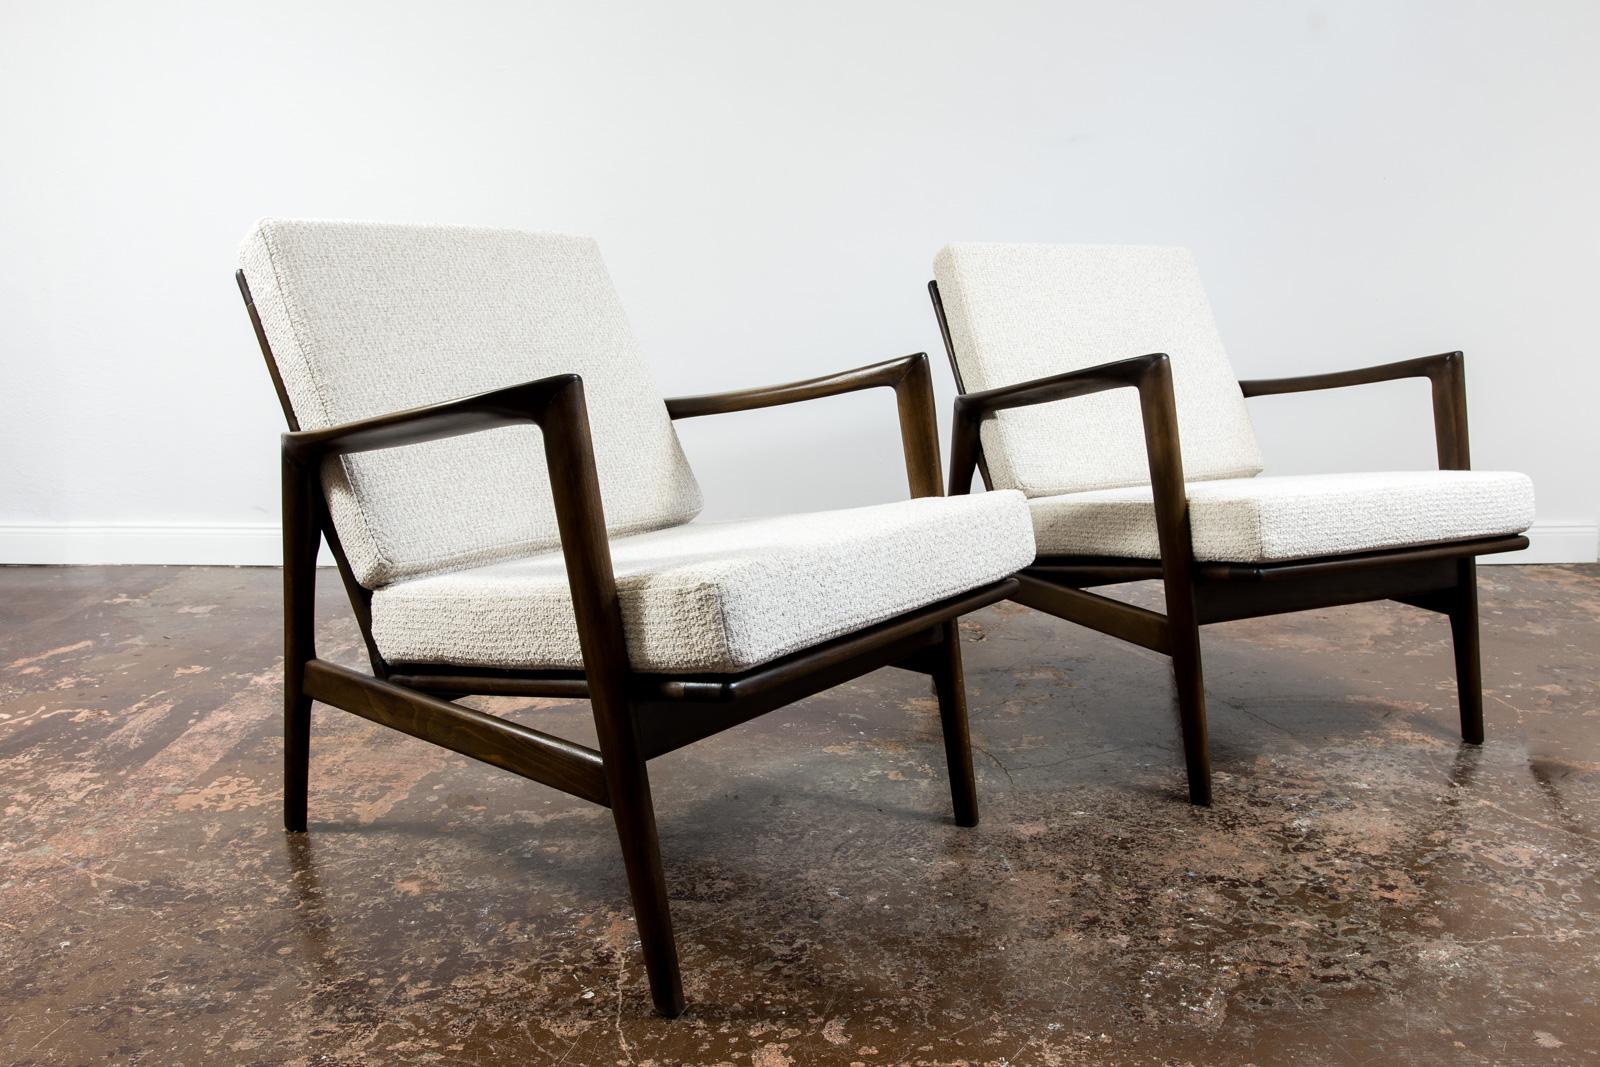 Customizable Pair of Mid Century Modern Armchairs Type 300-130, 1960s, Poland For Sale 1